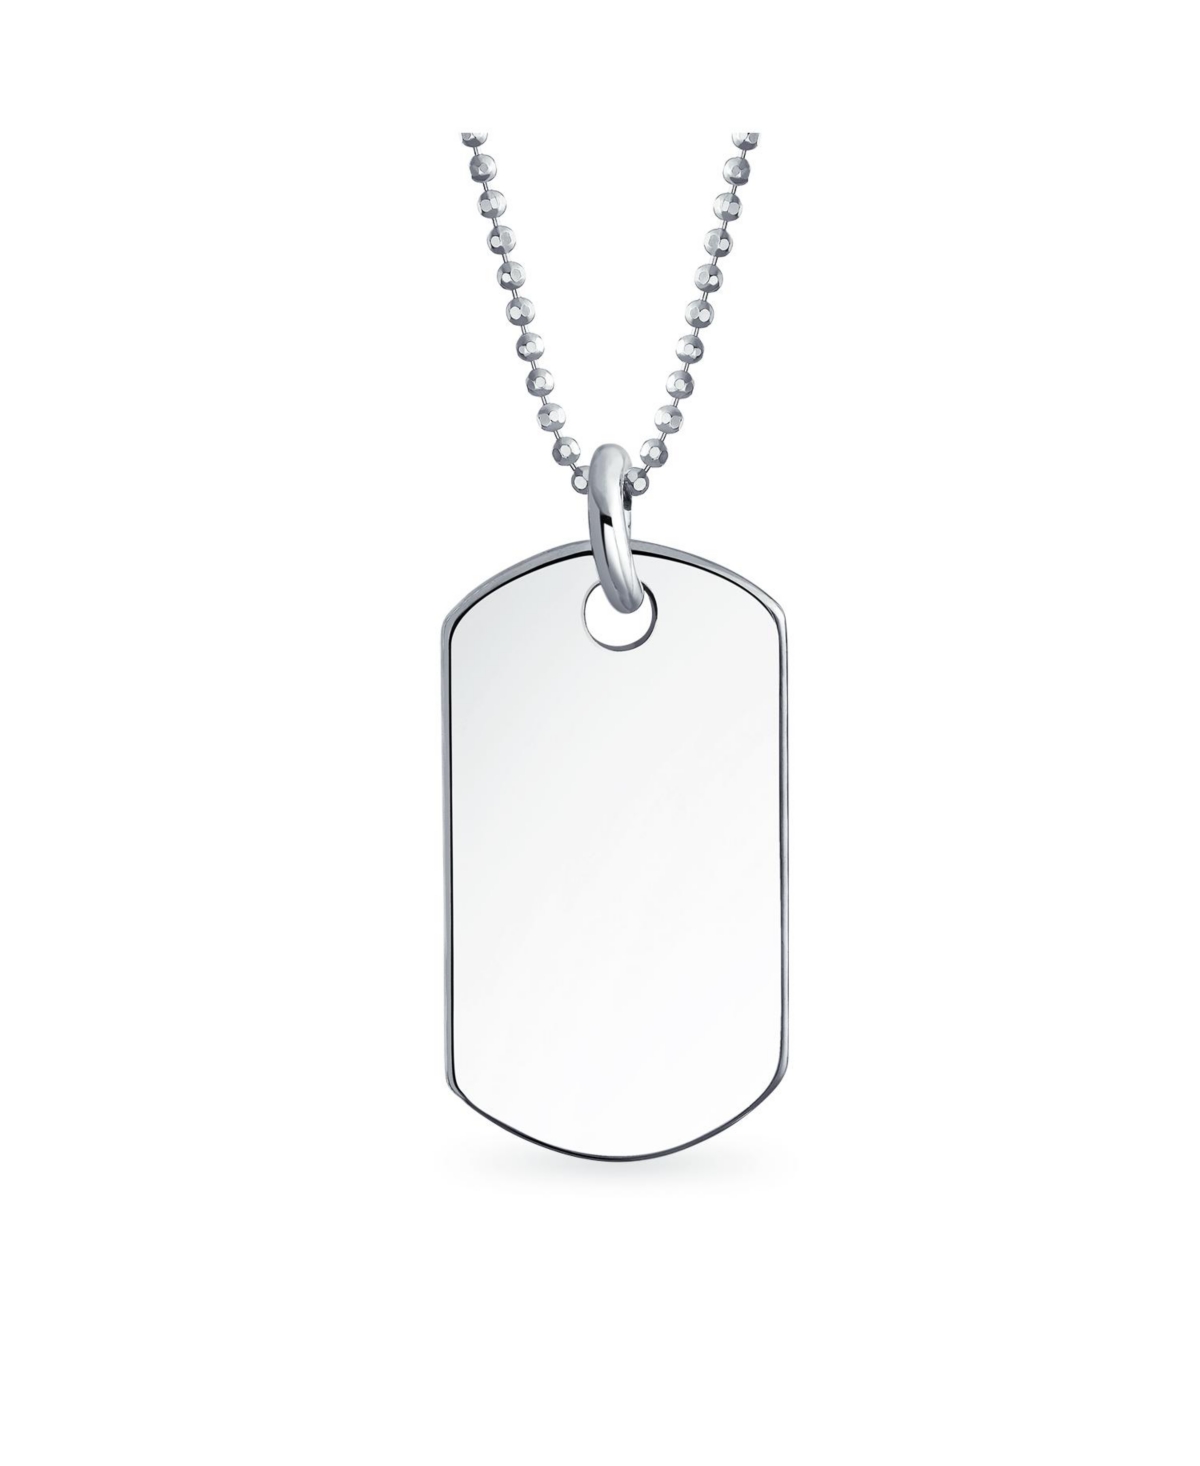 Medium Plain Simple Basic Cool Men's Identification Military Army Dog Tag Pendant Necklace For Men Teens Polished Sterling Silver - Silv